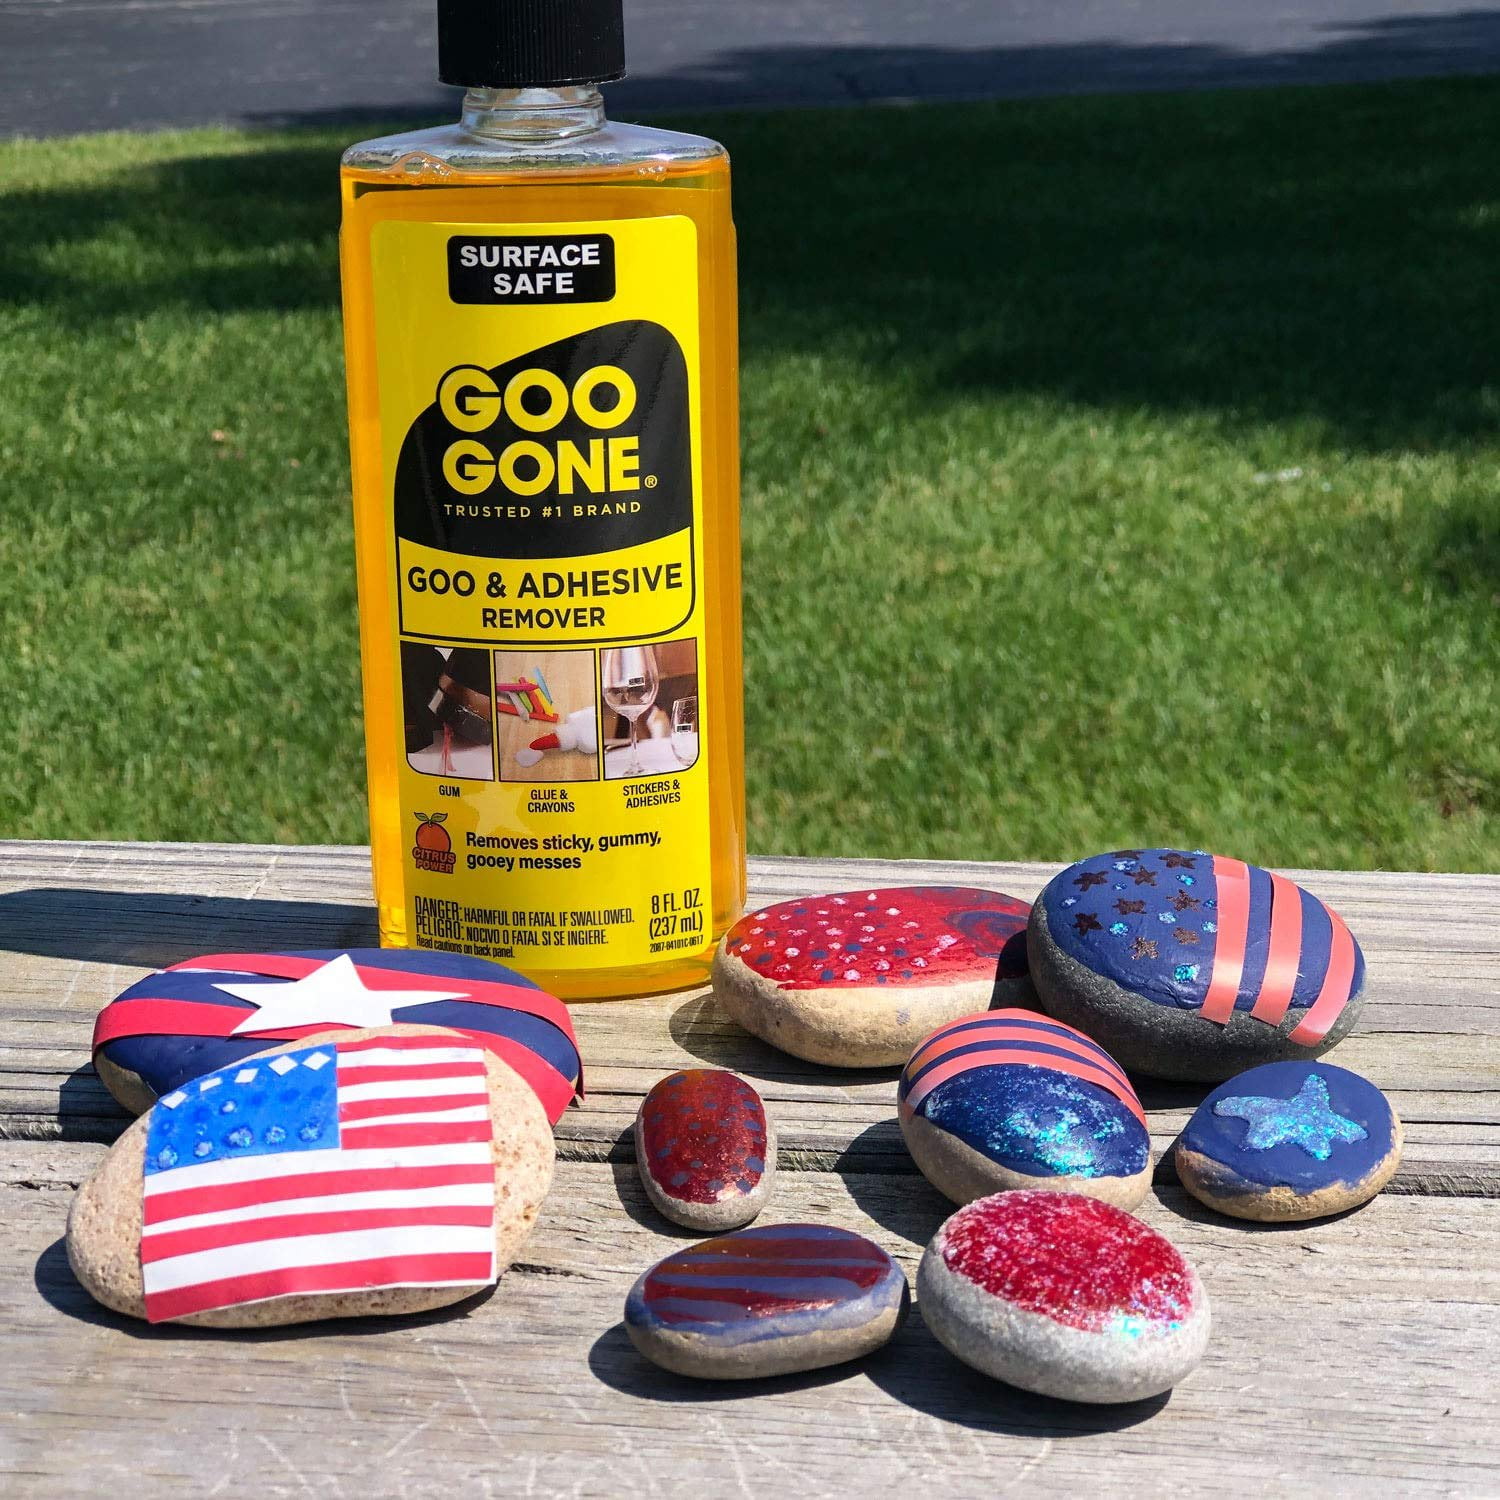 Screw goo gone, use oil abs baking soda to remove adhesives/glue